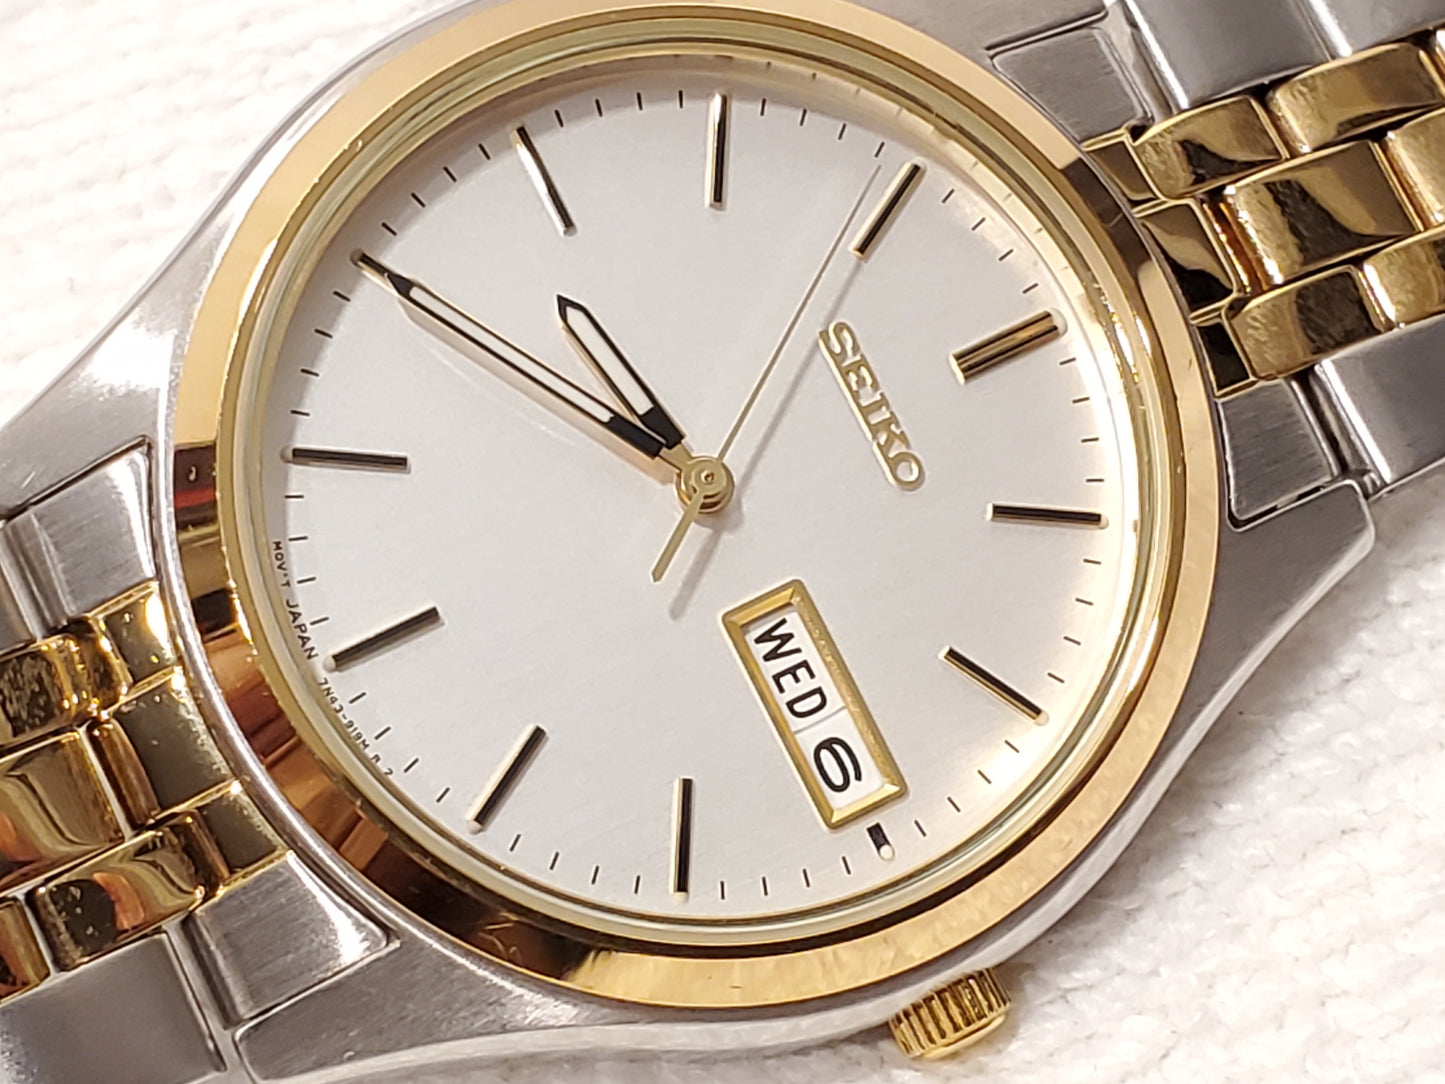 Vintage Seiko Men's Day Date Watch Stainless Steel Gold Tone Silver Dial